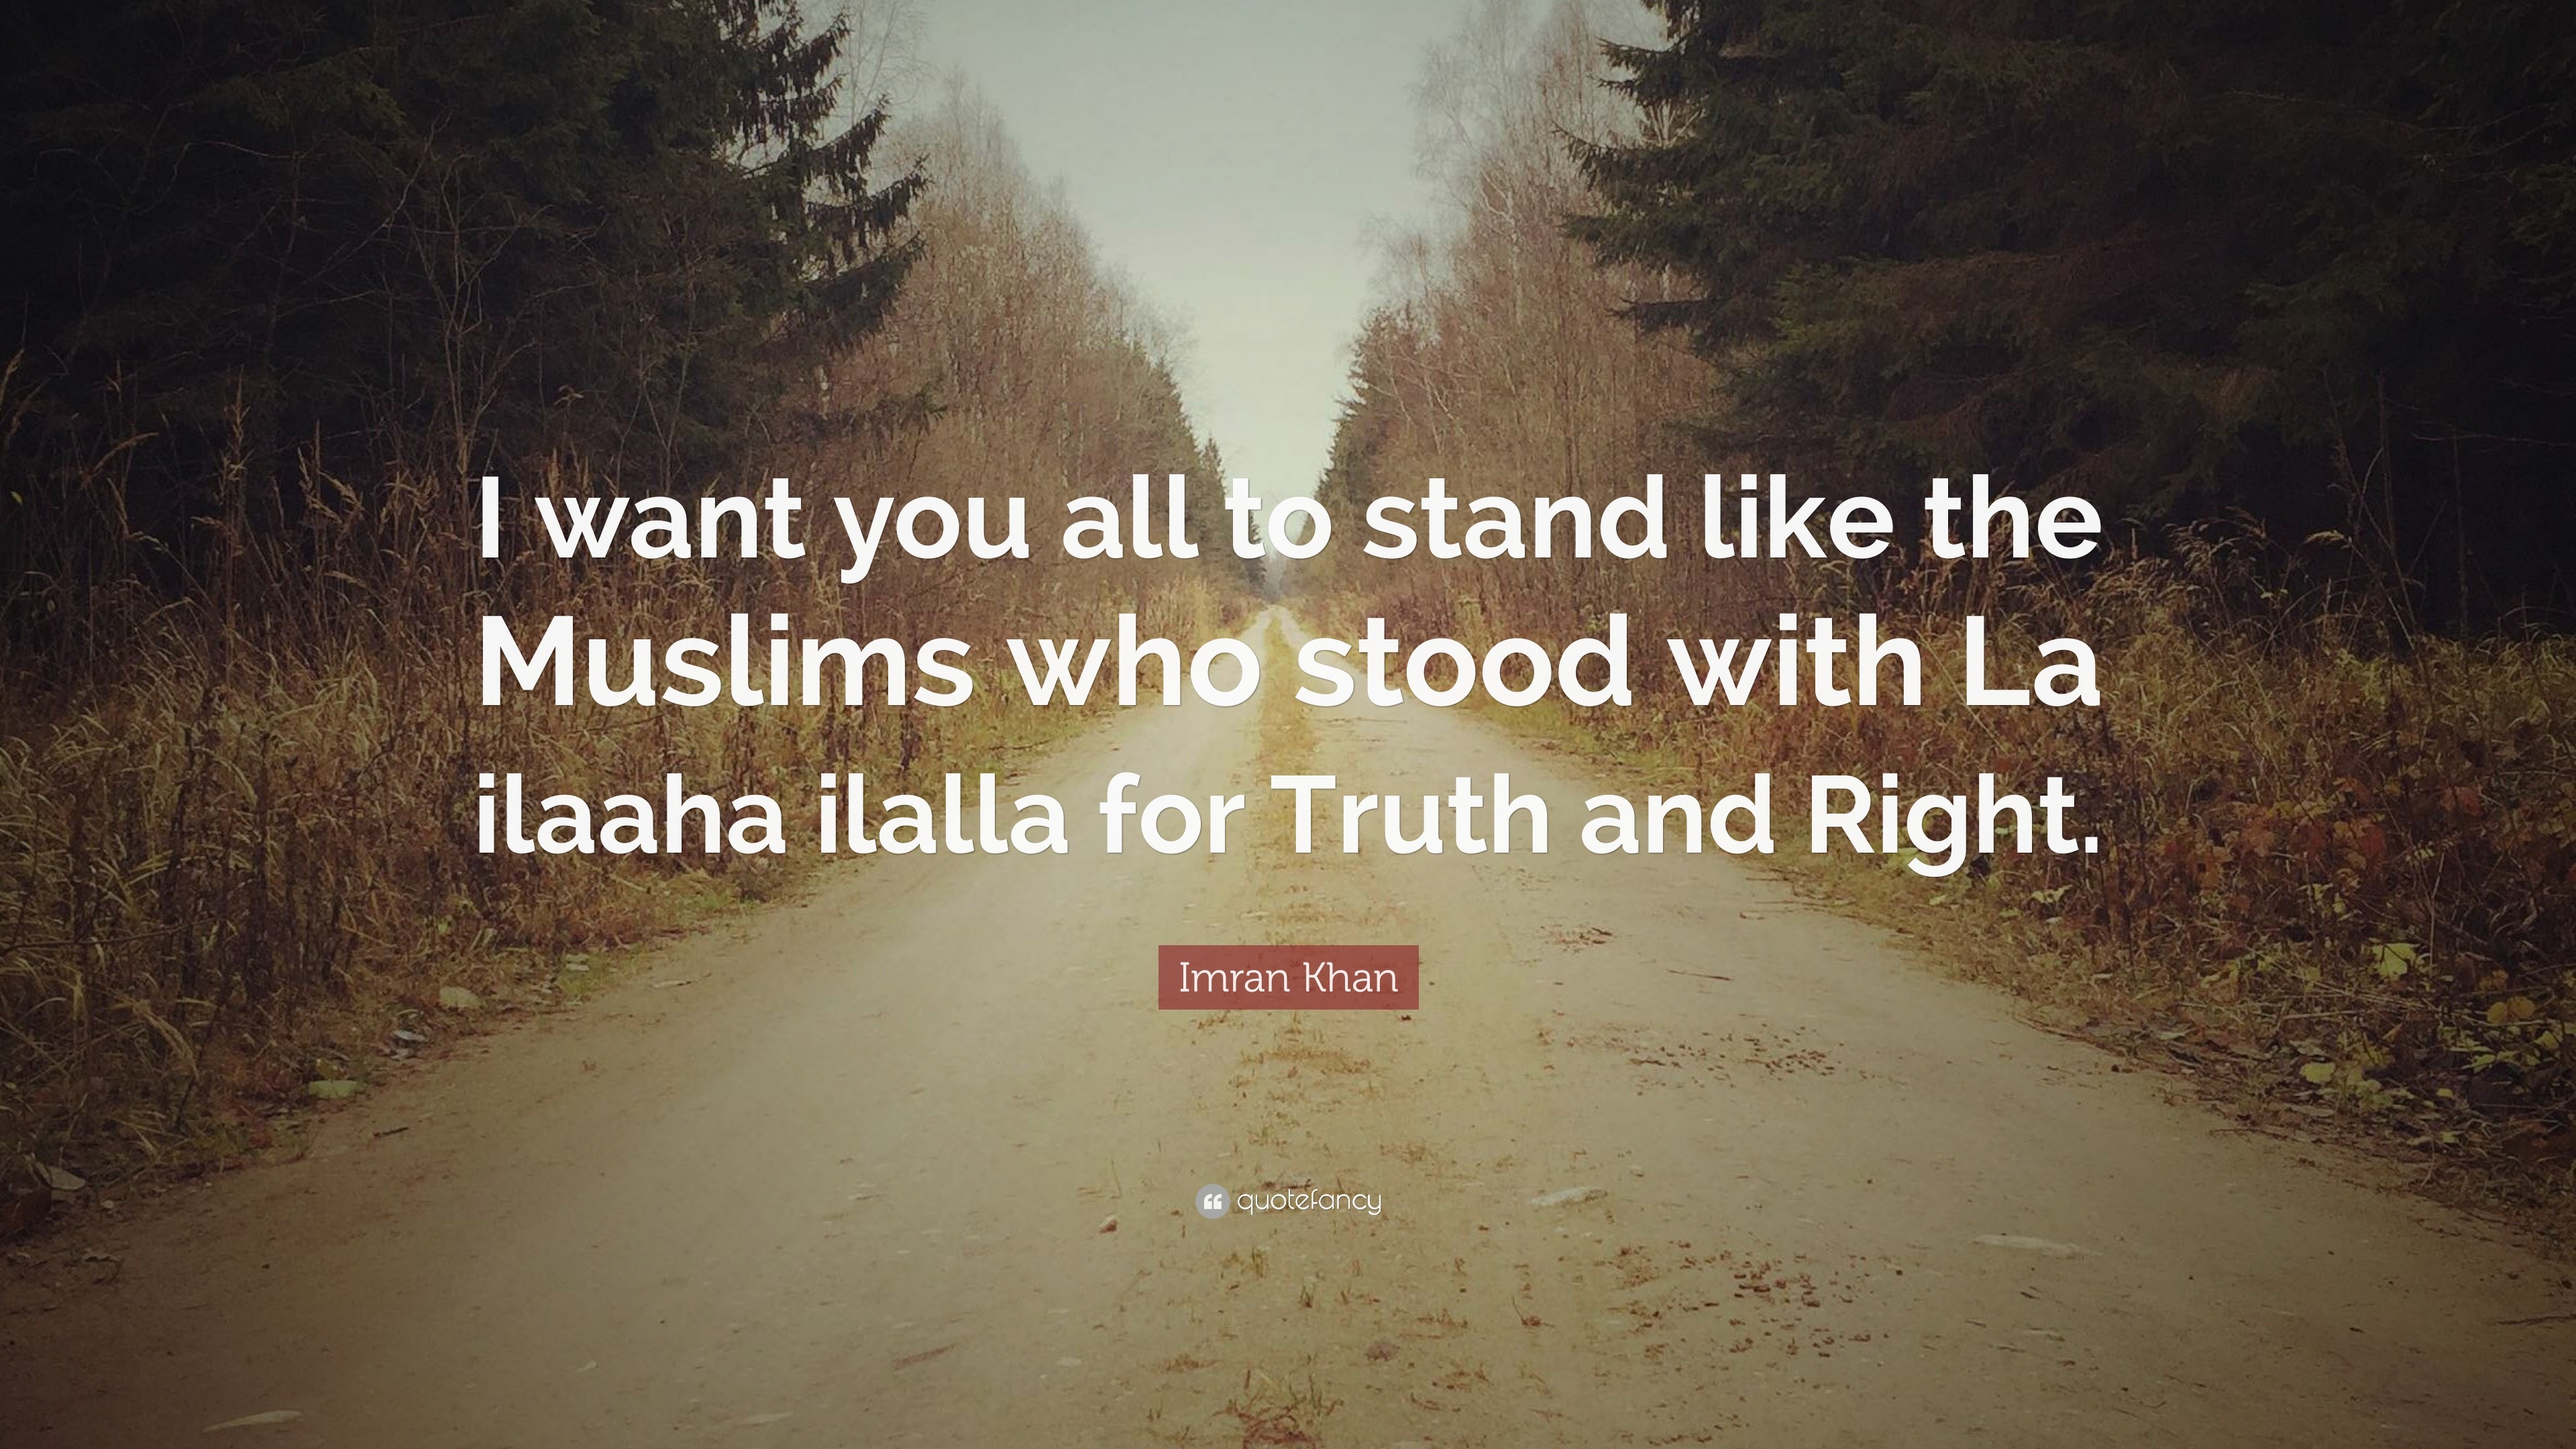 Imran Khan Quote: “I want you all to stand like the Muslims who stood